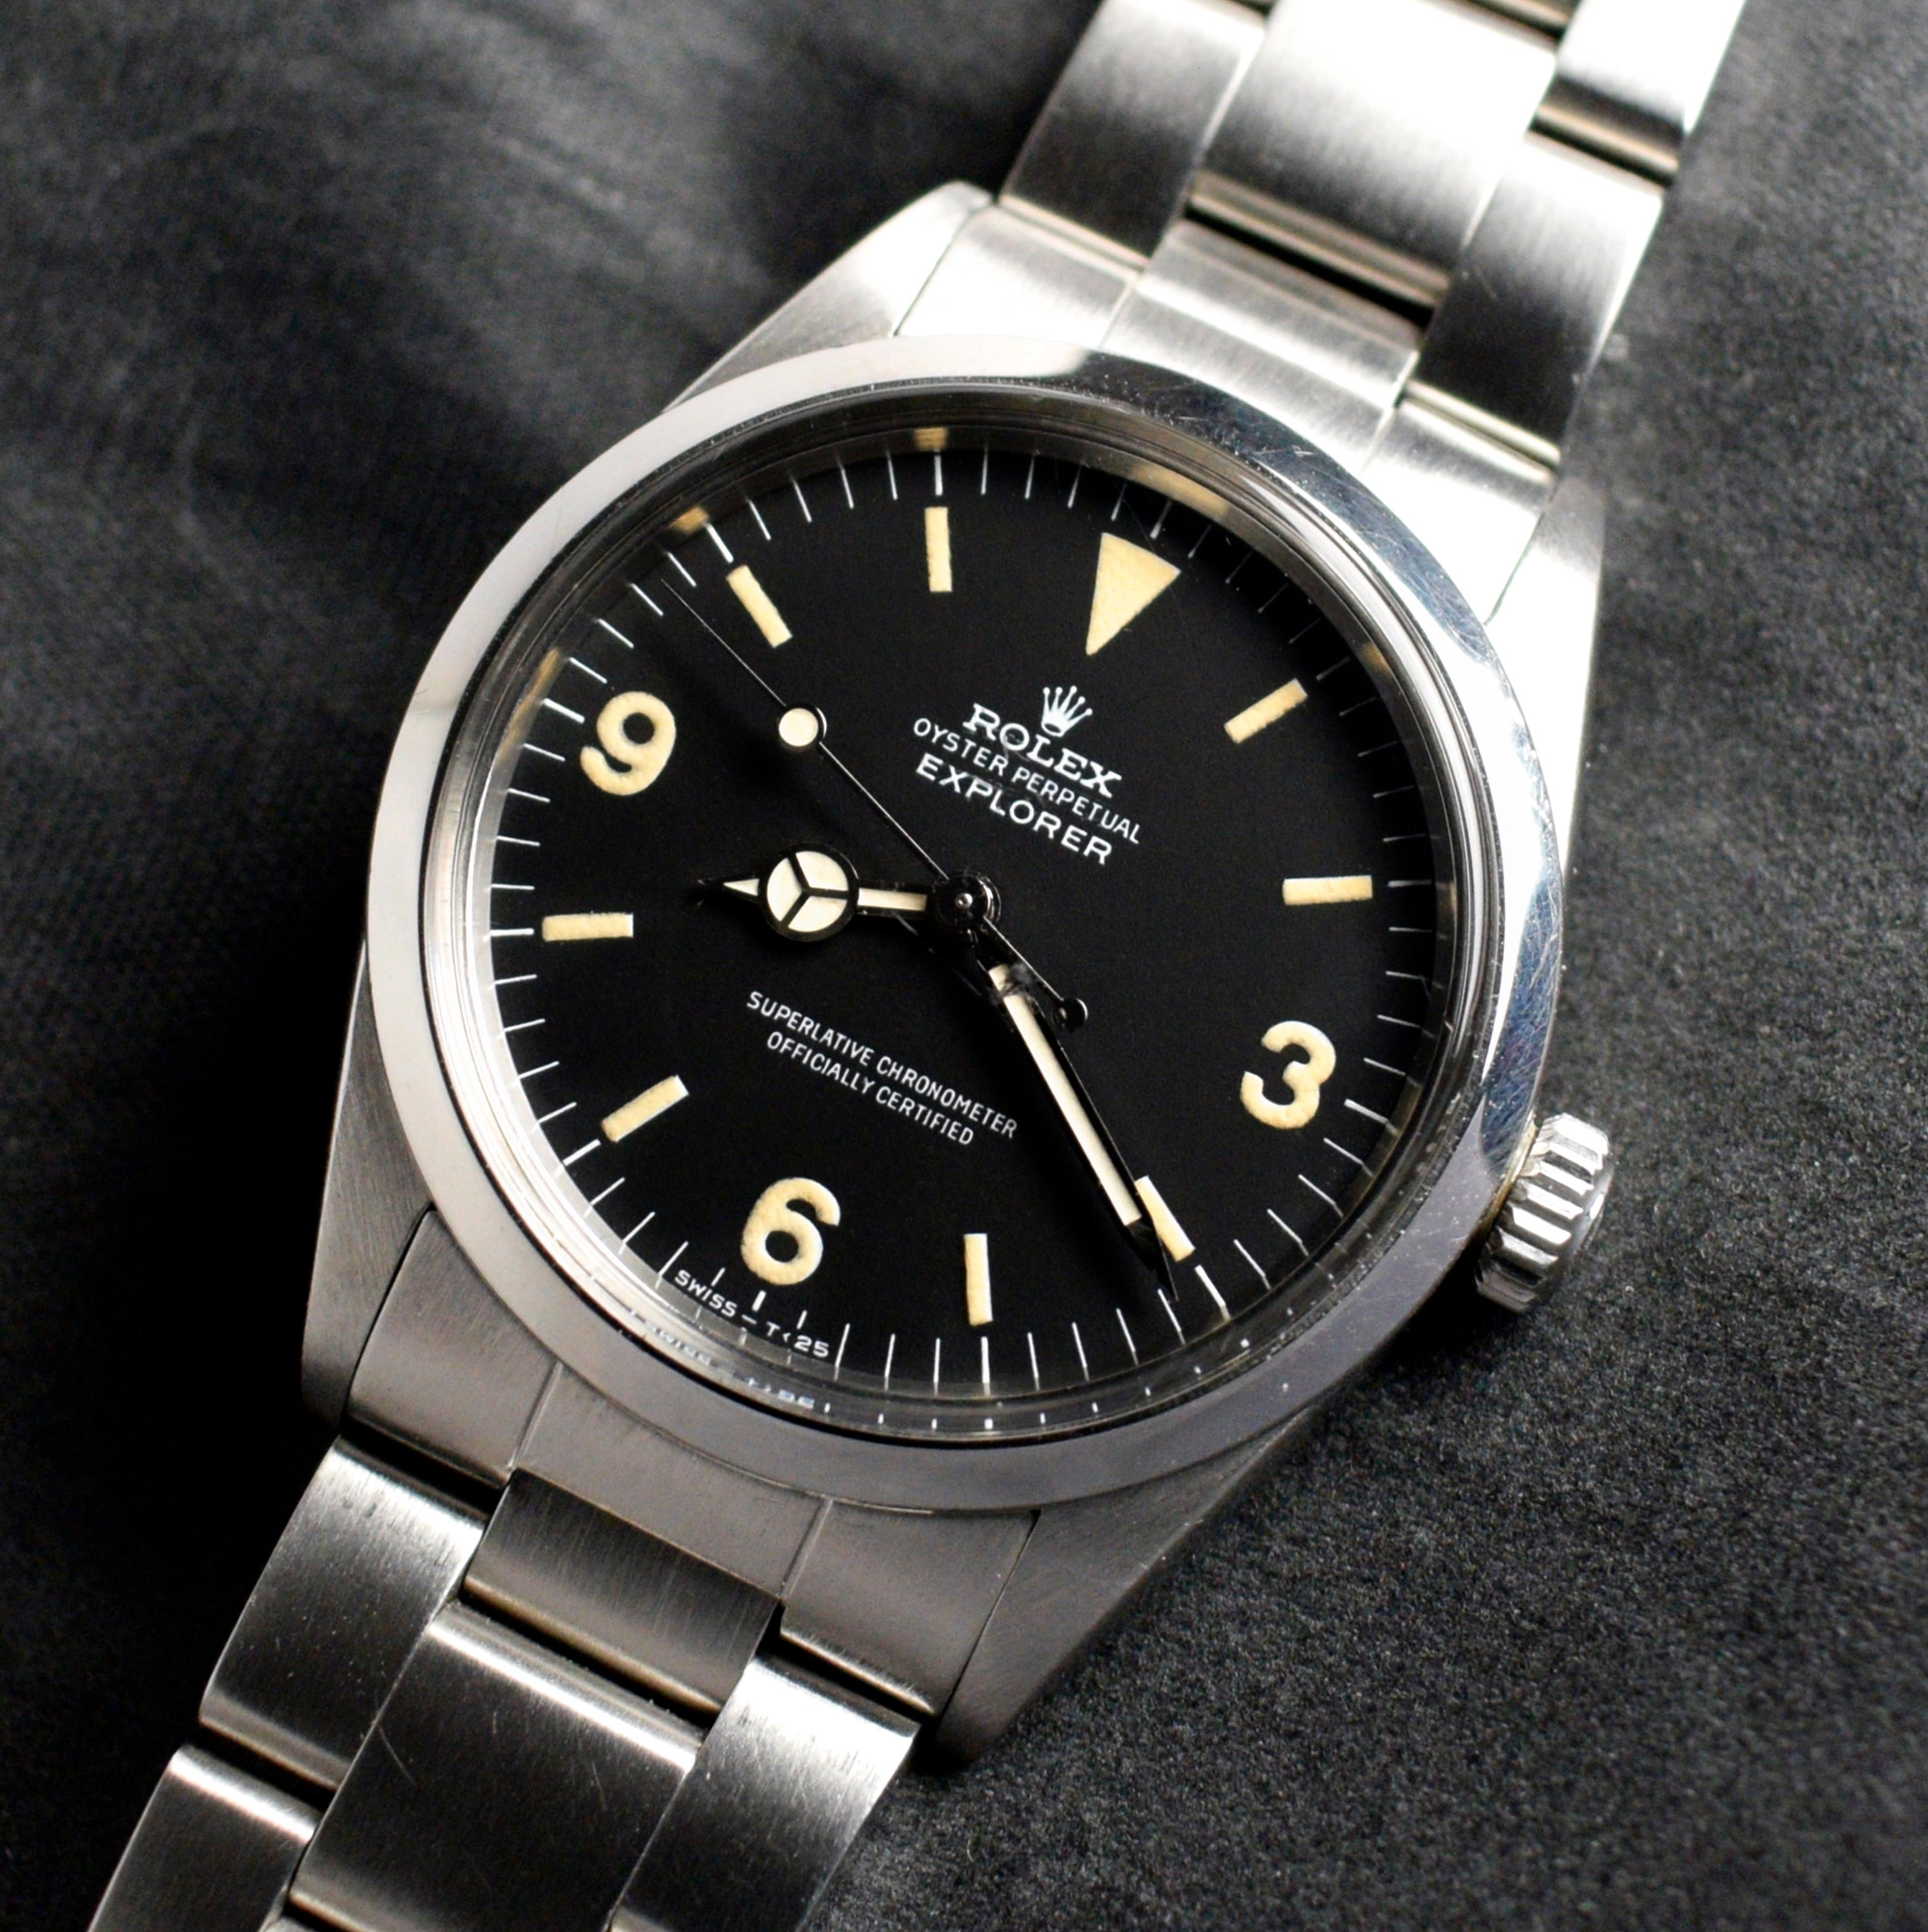 Brand: Vintage Rolex
Model: 1016
Year: 1972
Serial number: 29xxxxx
Reference: OT1628; C03778

Case: Show sign of wear with slight polish from previous; inner case back stamped 1016 I.72

Dial: Excellent Condition Matte Tritium Dial w/ matching hands